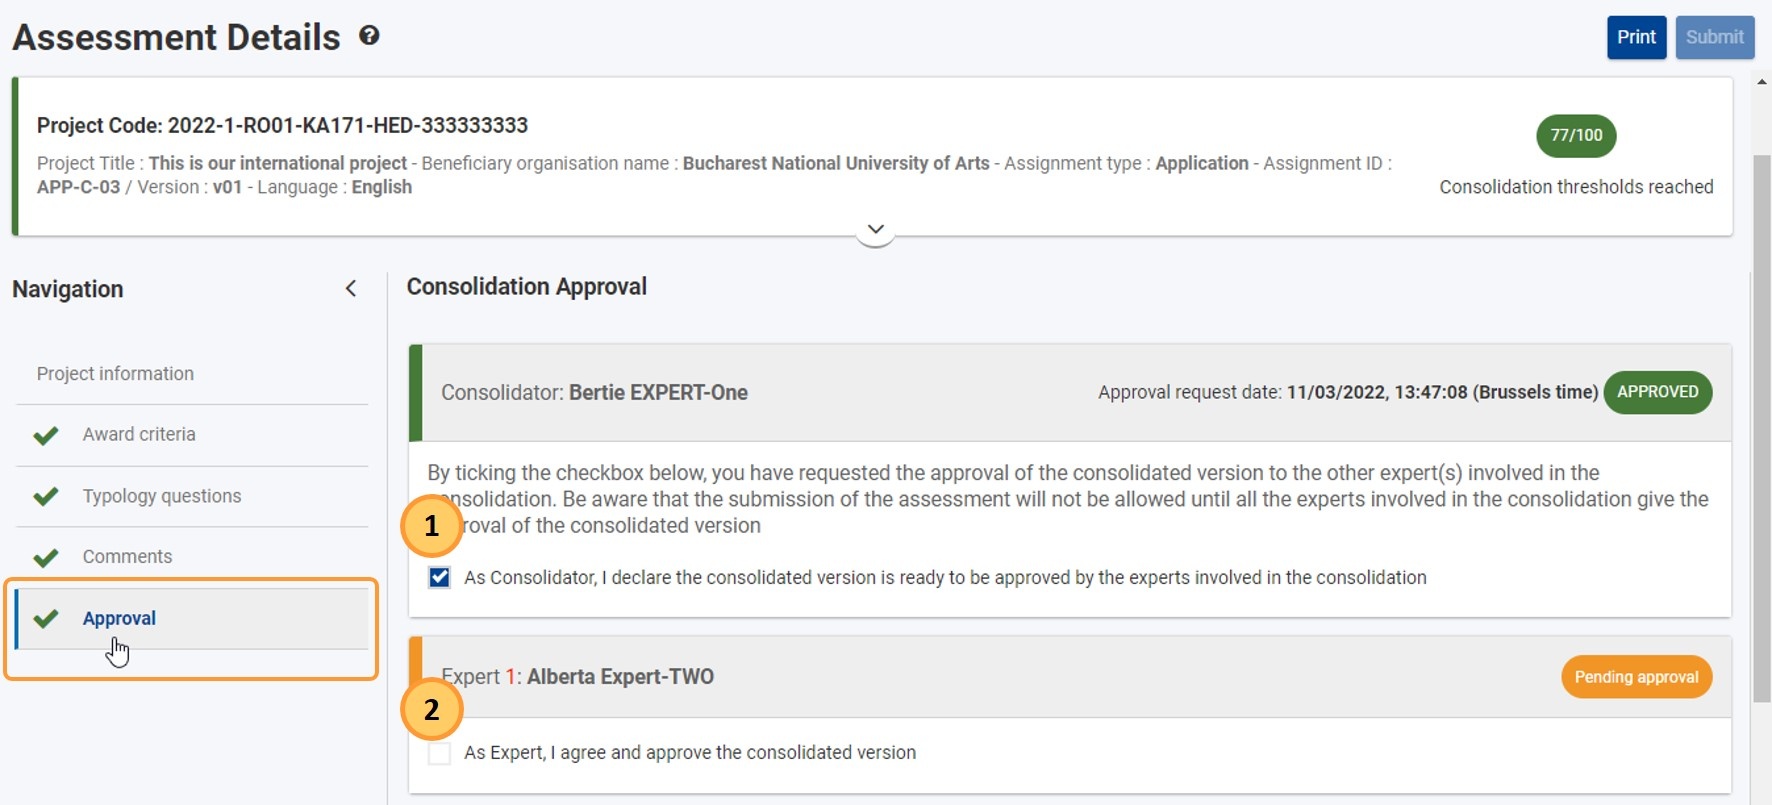 Access Approval section in the Assessment Details